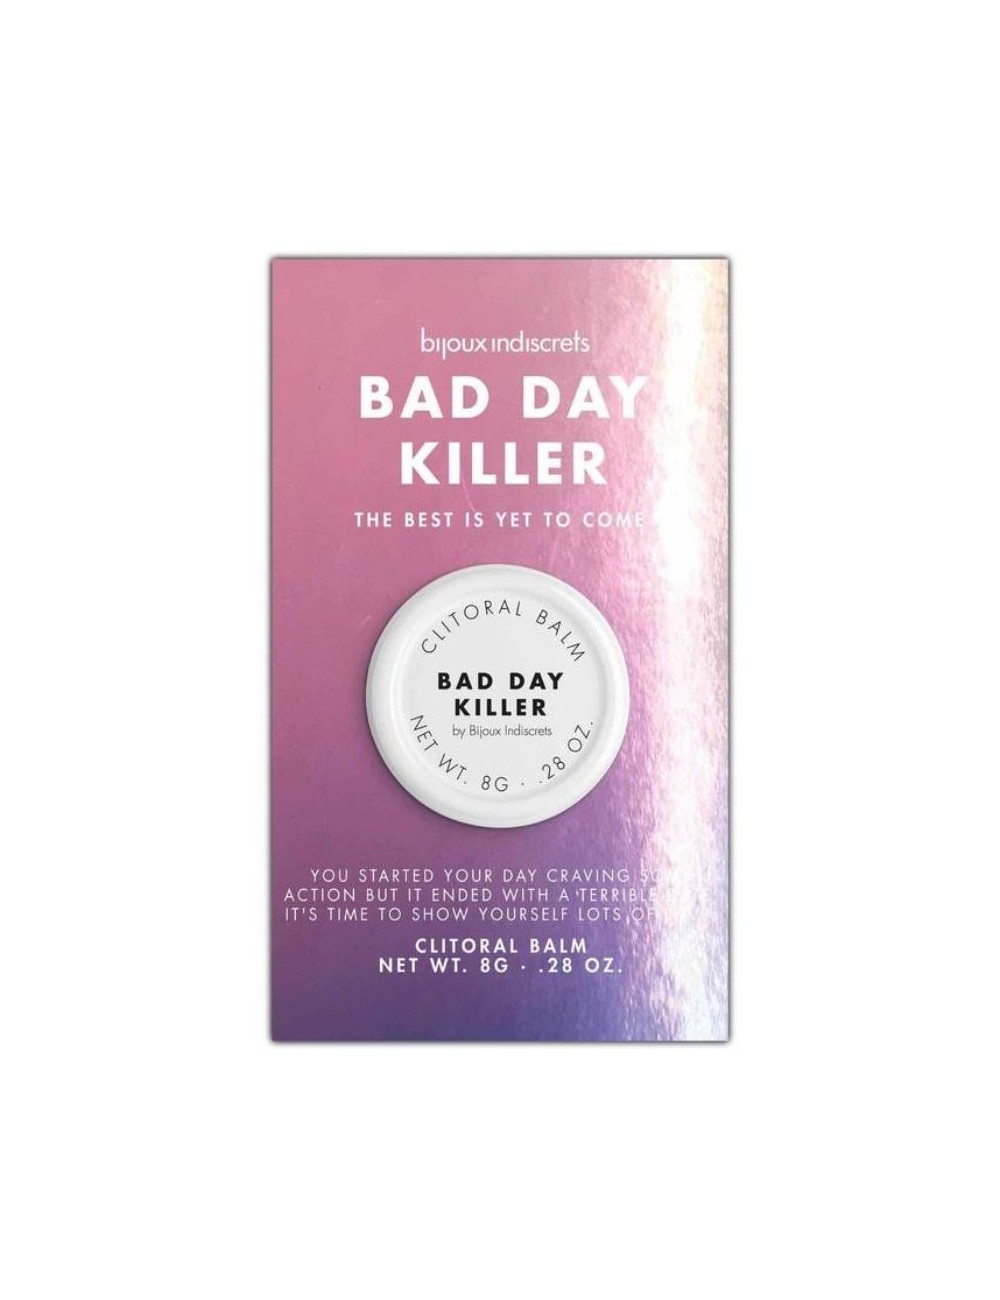 CLITHERAPY CLIT BALSAM BAD DAY KILLER - Aphrodisiaques - BIJOUX CLITHERAPY